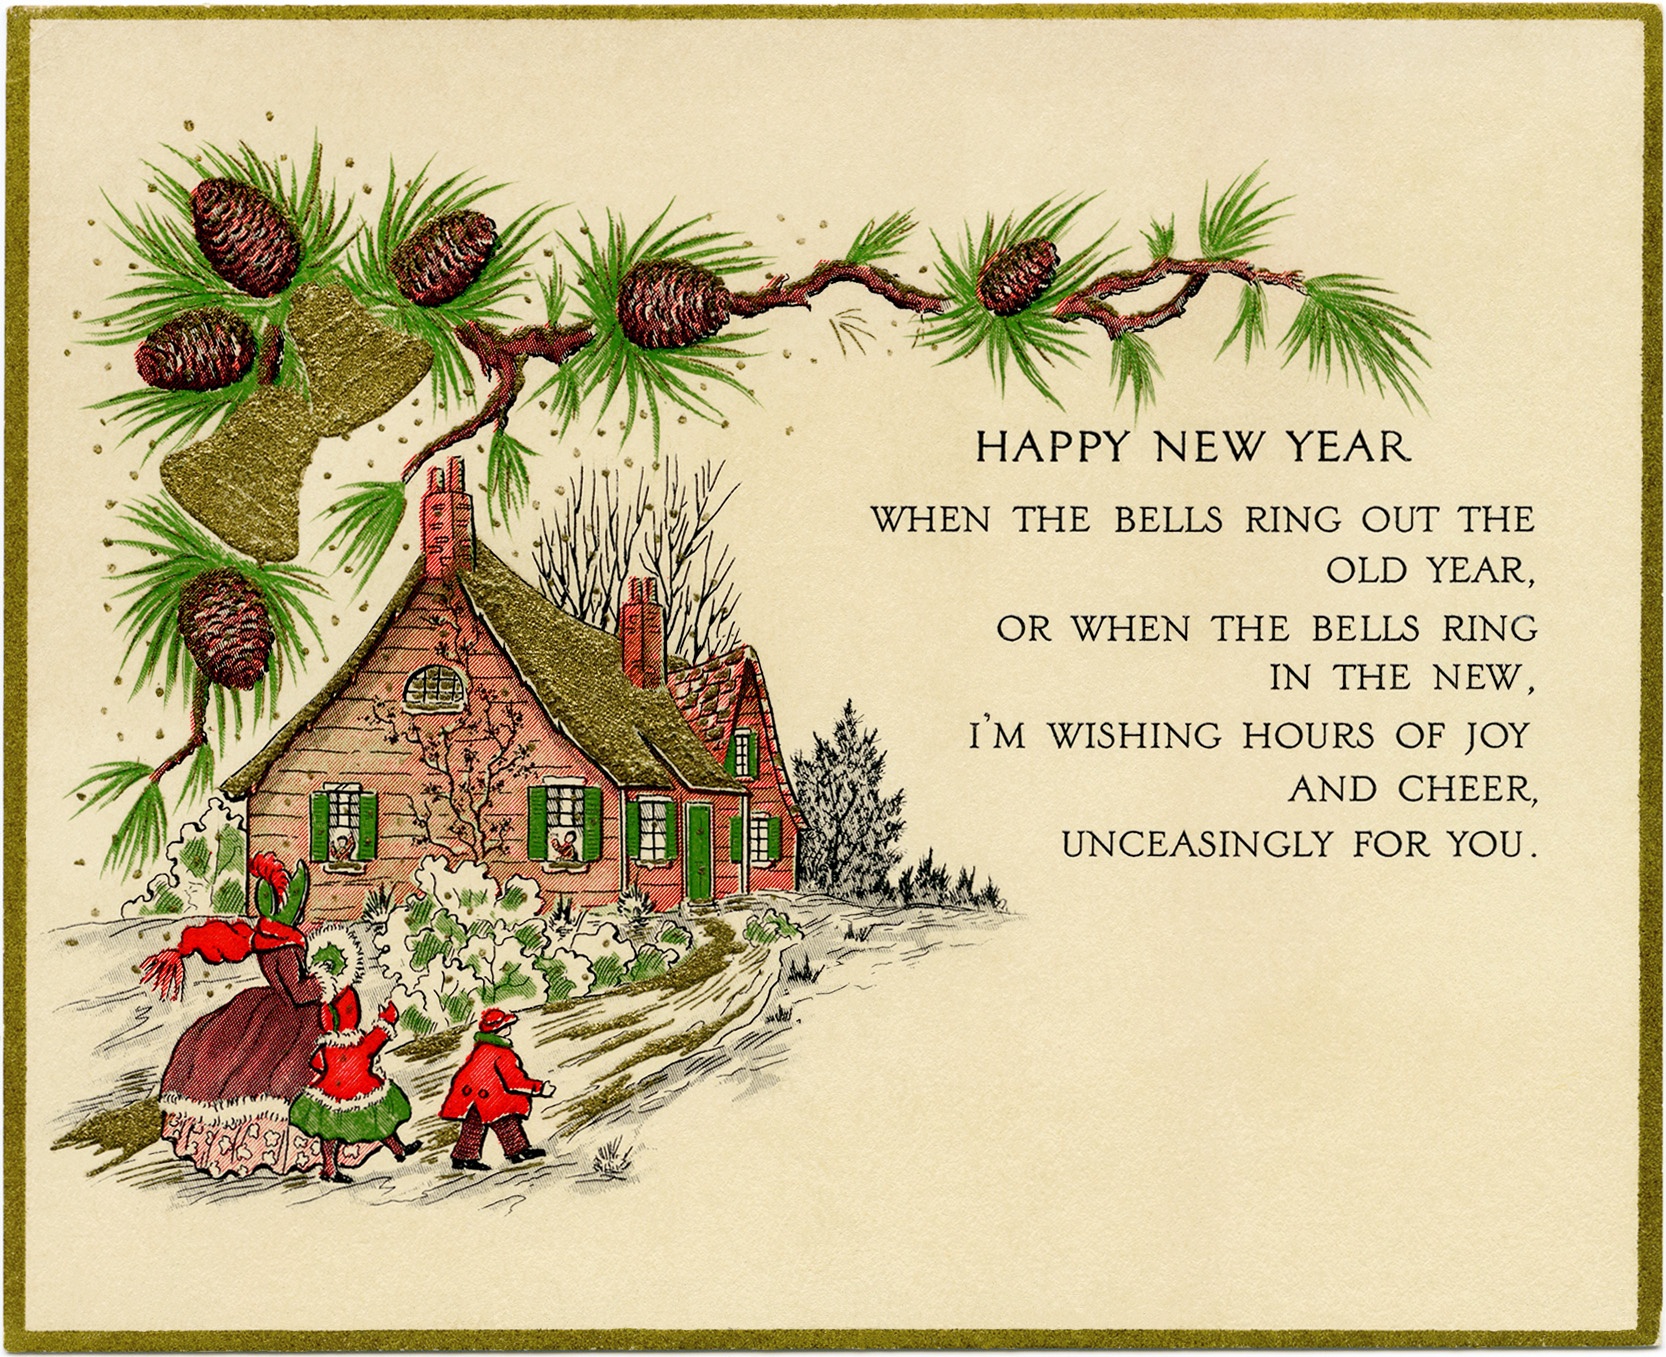 Vintage New Year Greeting Card - Old Design Shop Blog - Free Printable Happy New Year Cards